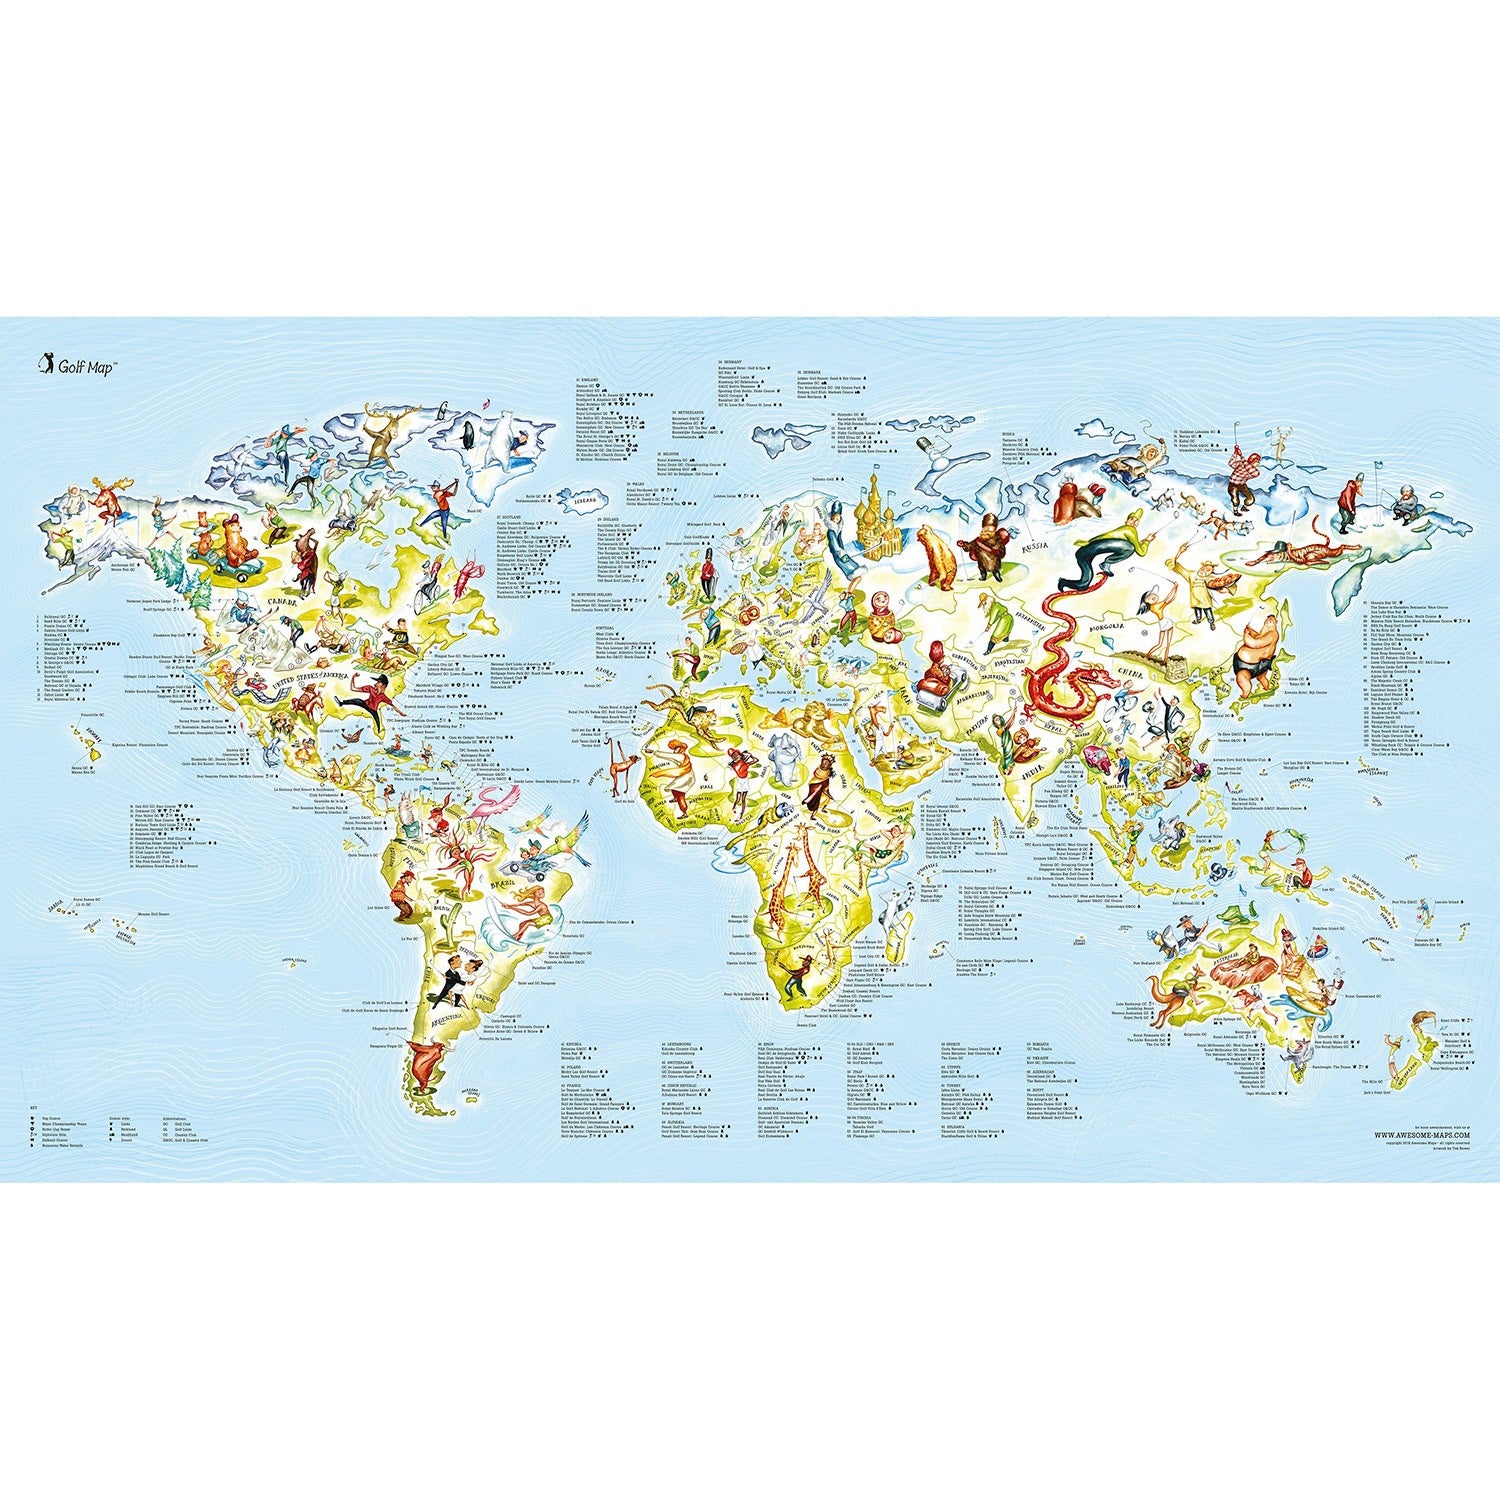 Awesome Maps - World Map Poster - Golf Map